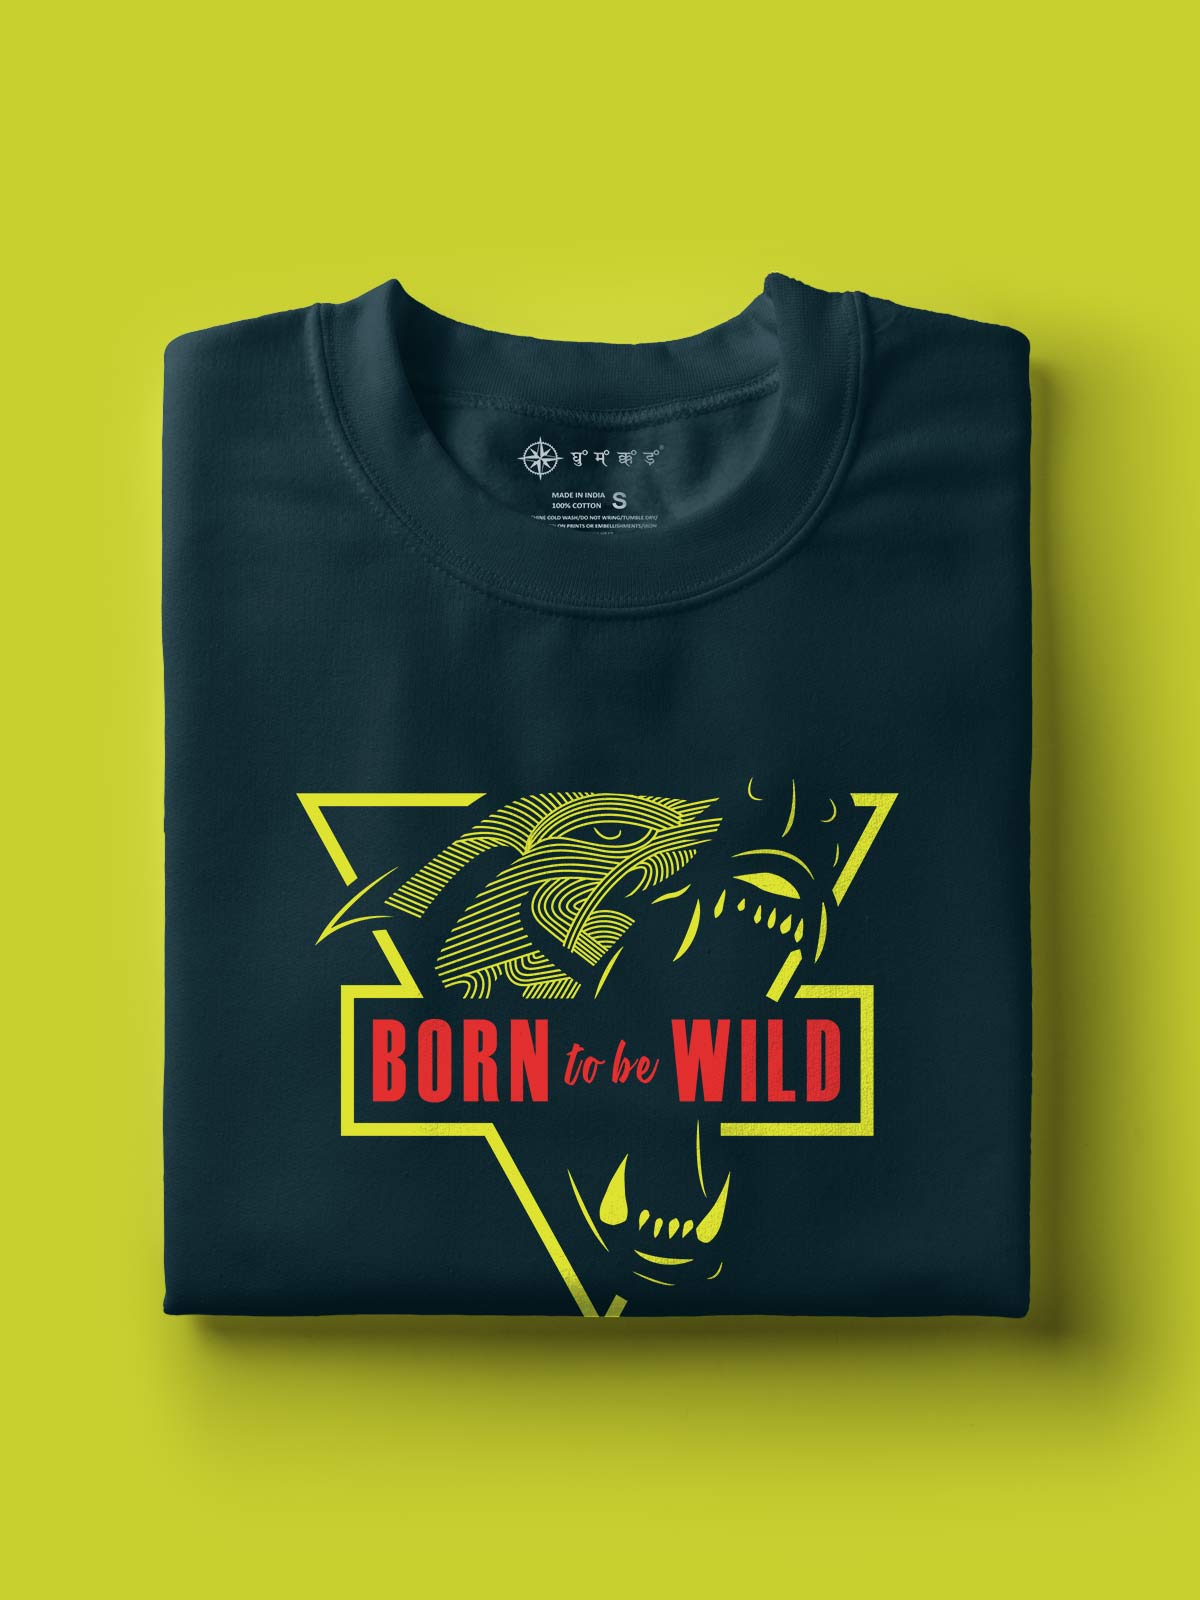 Born-to-be-wild-printed-t-shirt-for-men by Ghumakkad